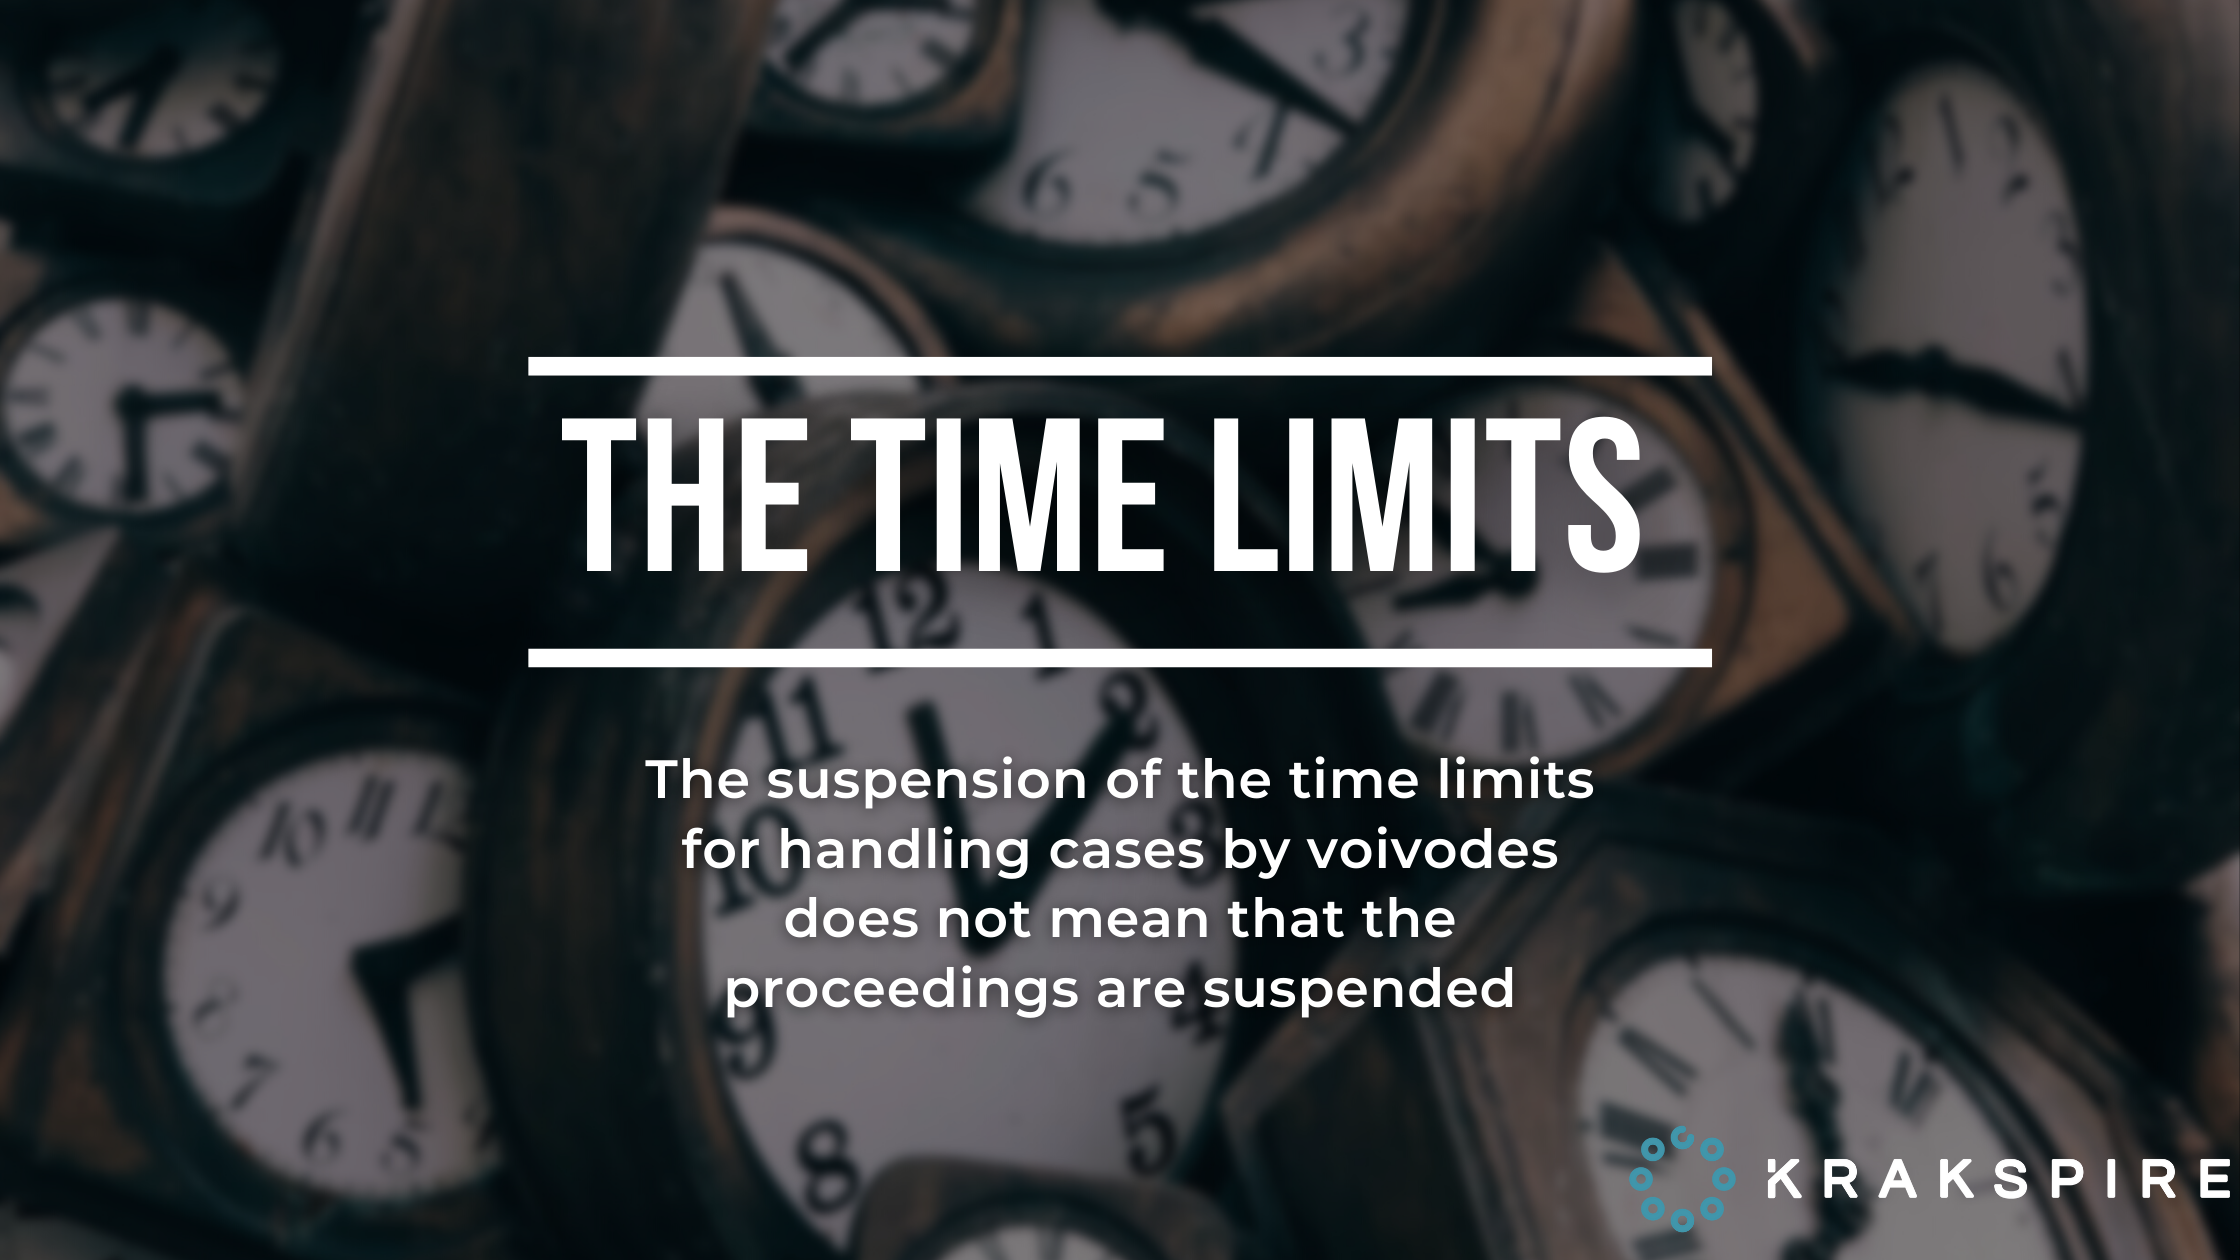 Suspension of time limits for handling cases by voivodes